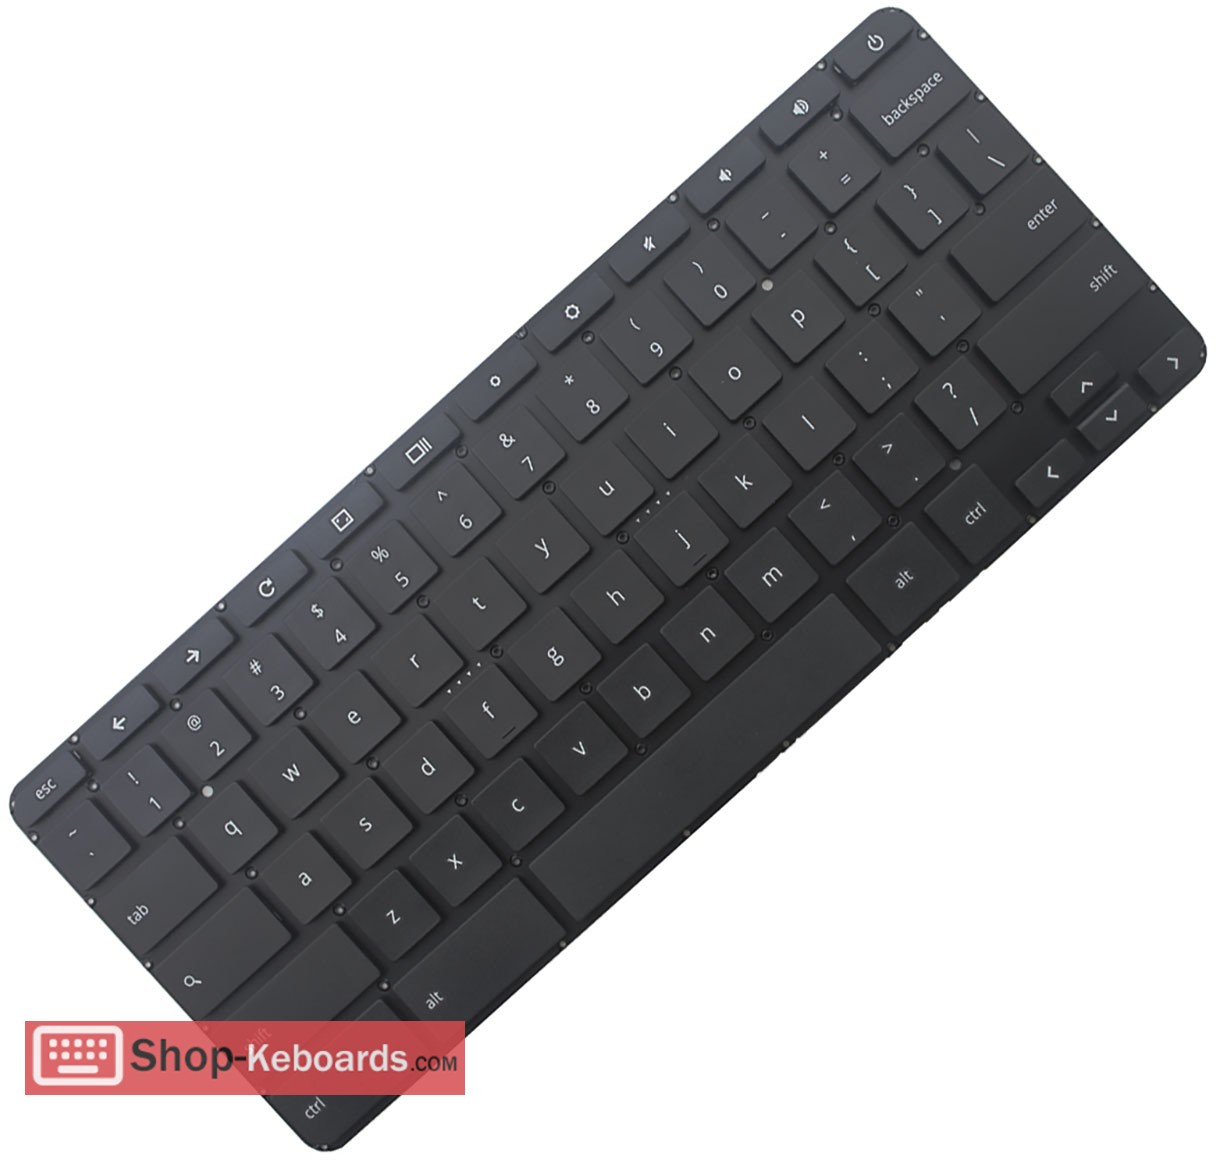 HP Chromebook 11 G3 Keyboard replacement